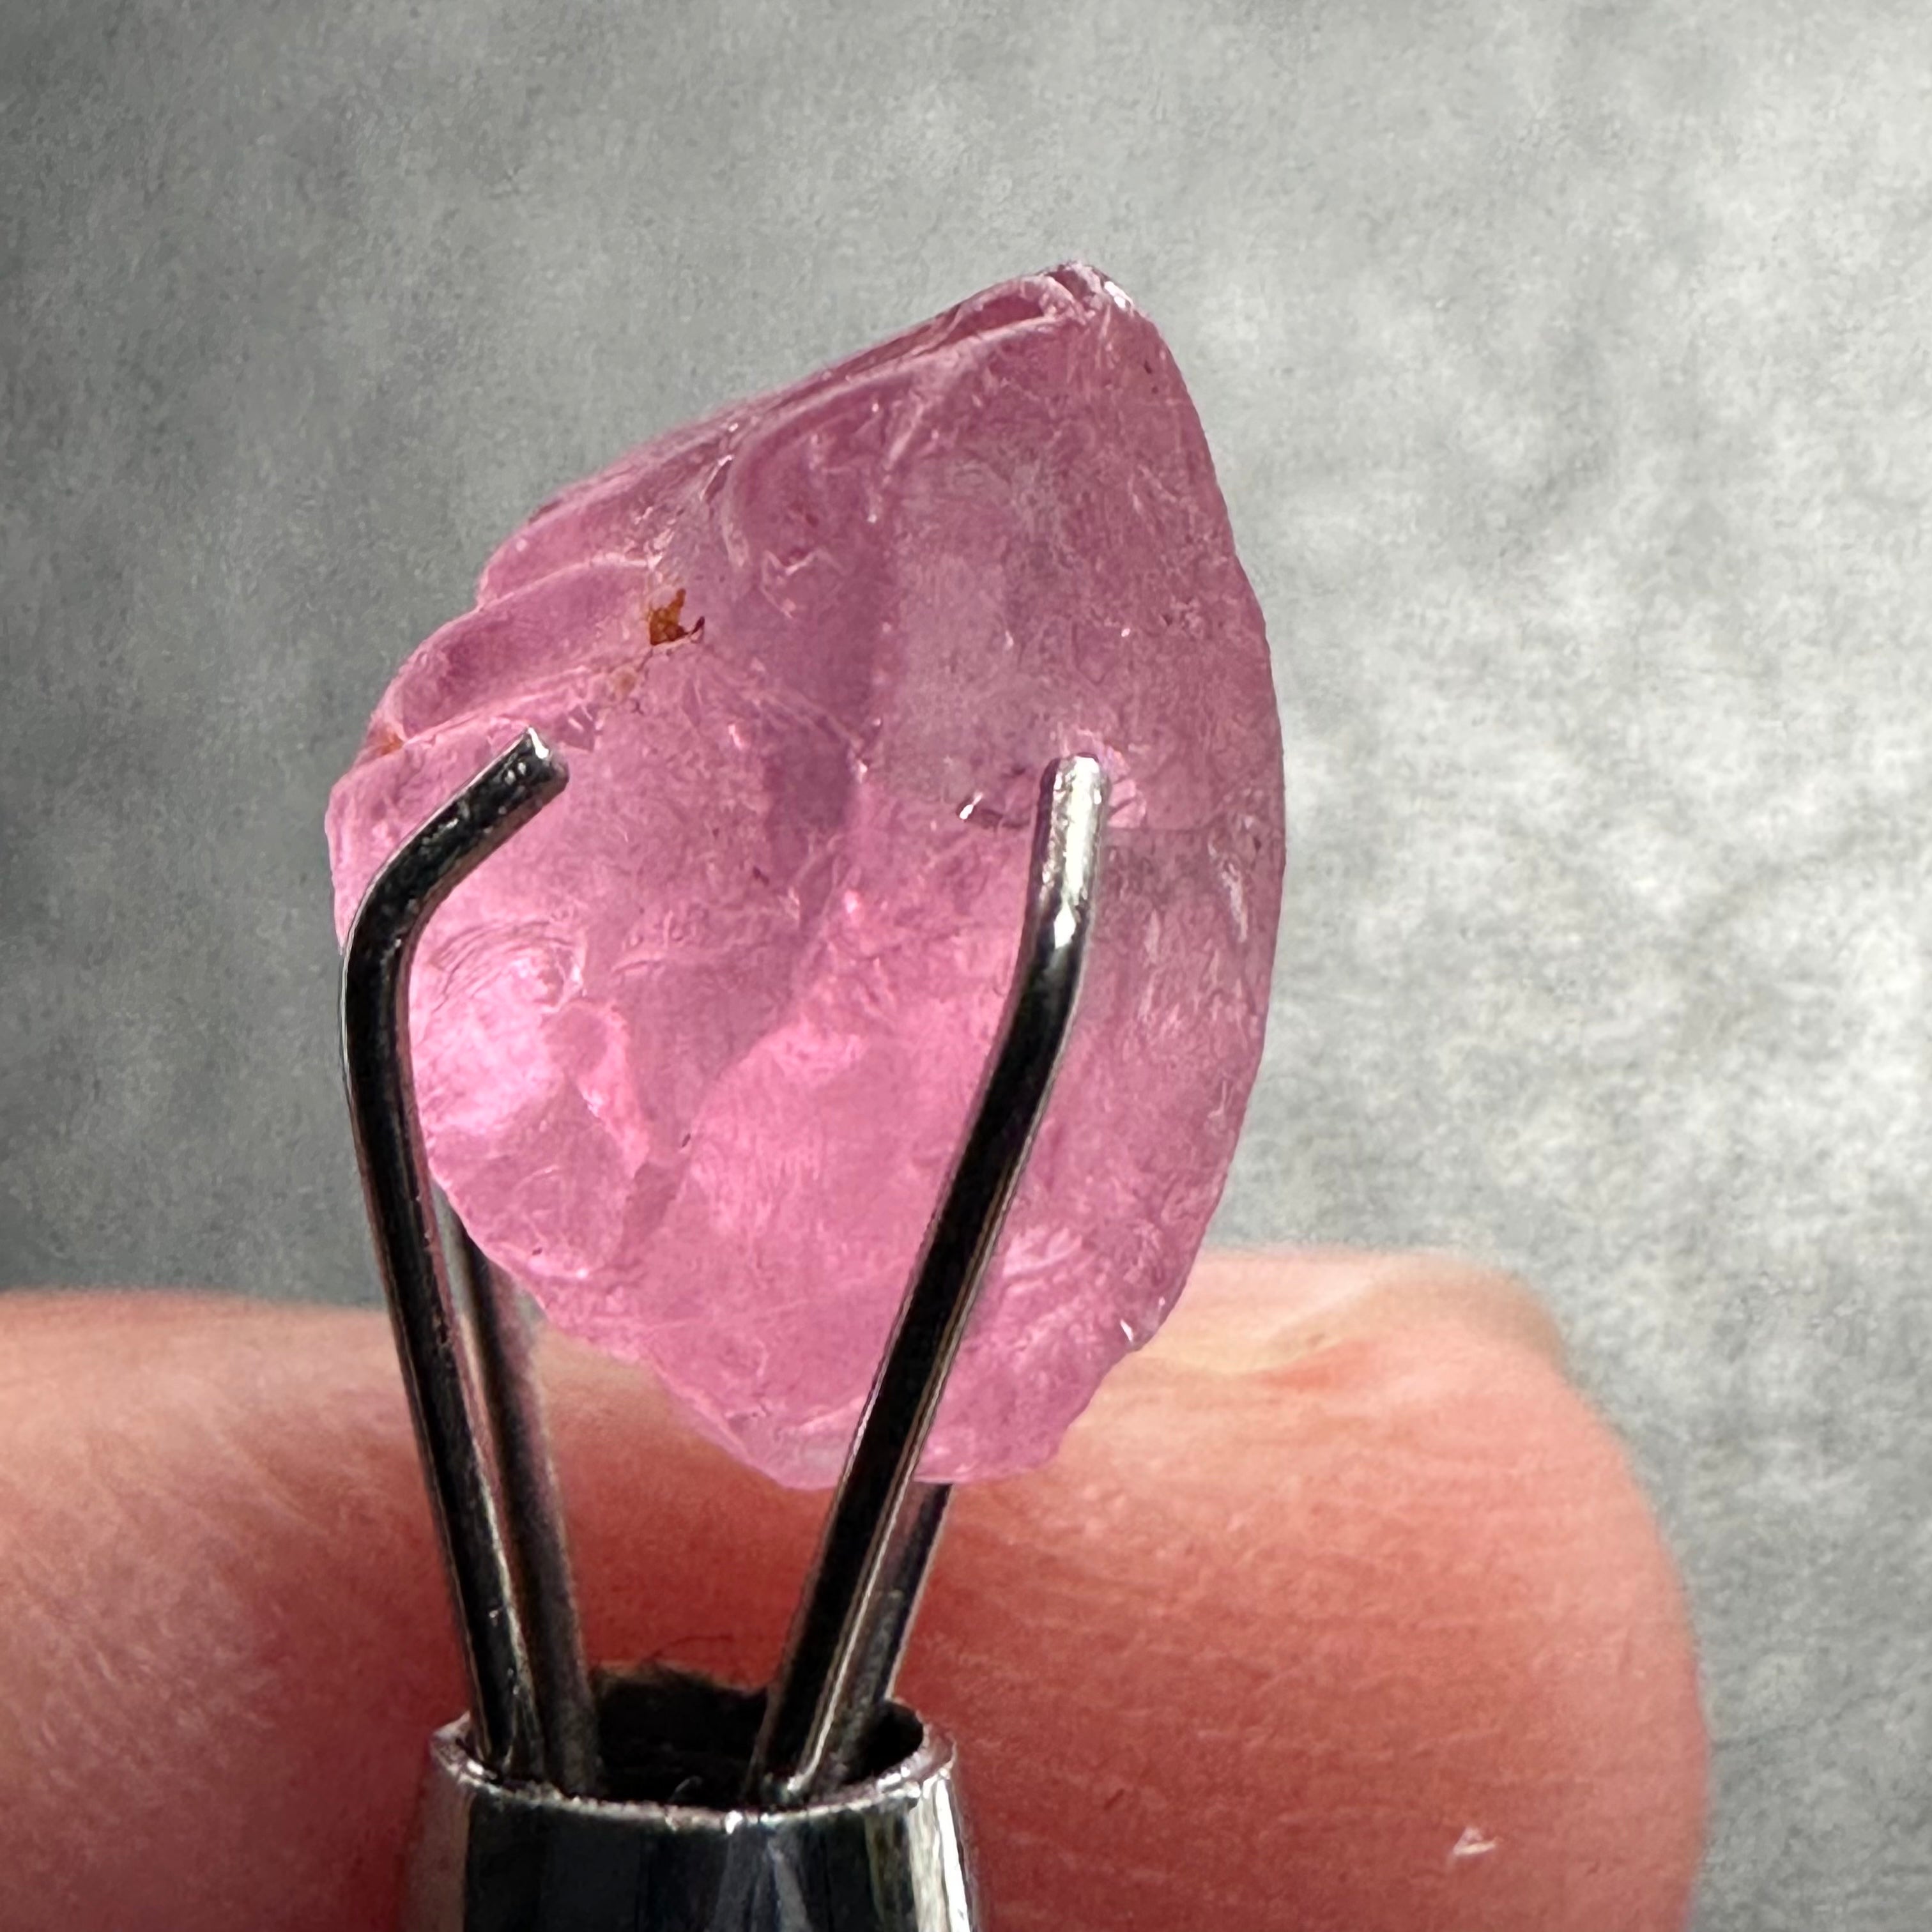 2.69Ct Pink Spinel Tanzania Vs + Silky Untreated Unheated